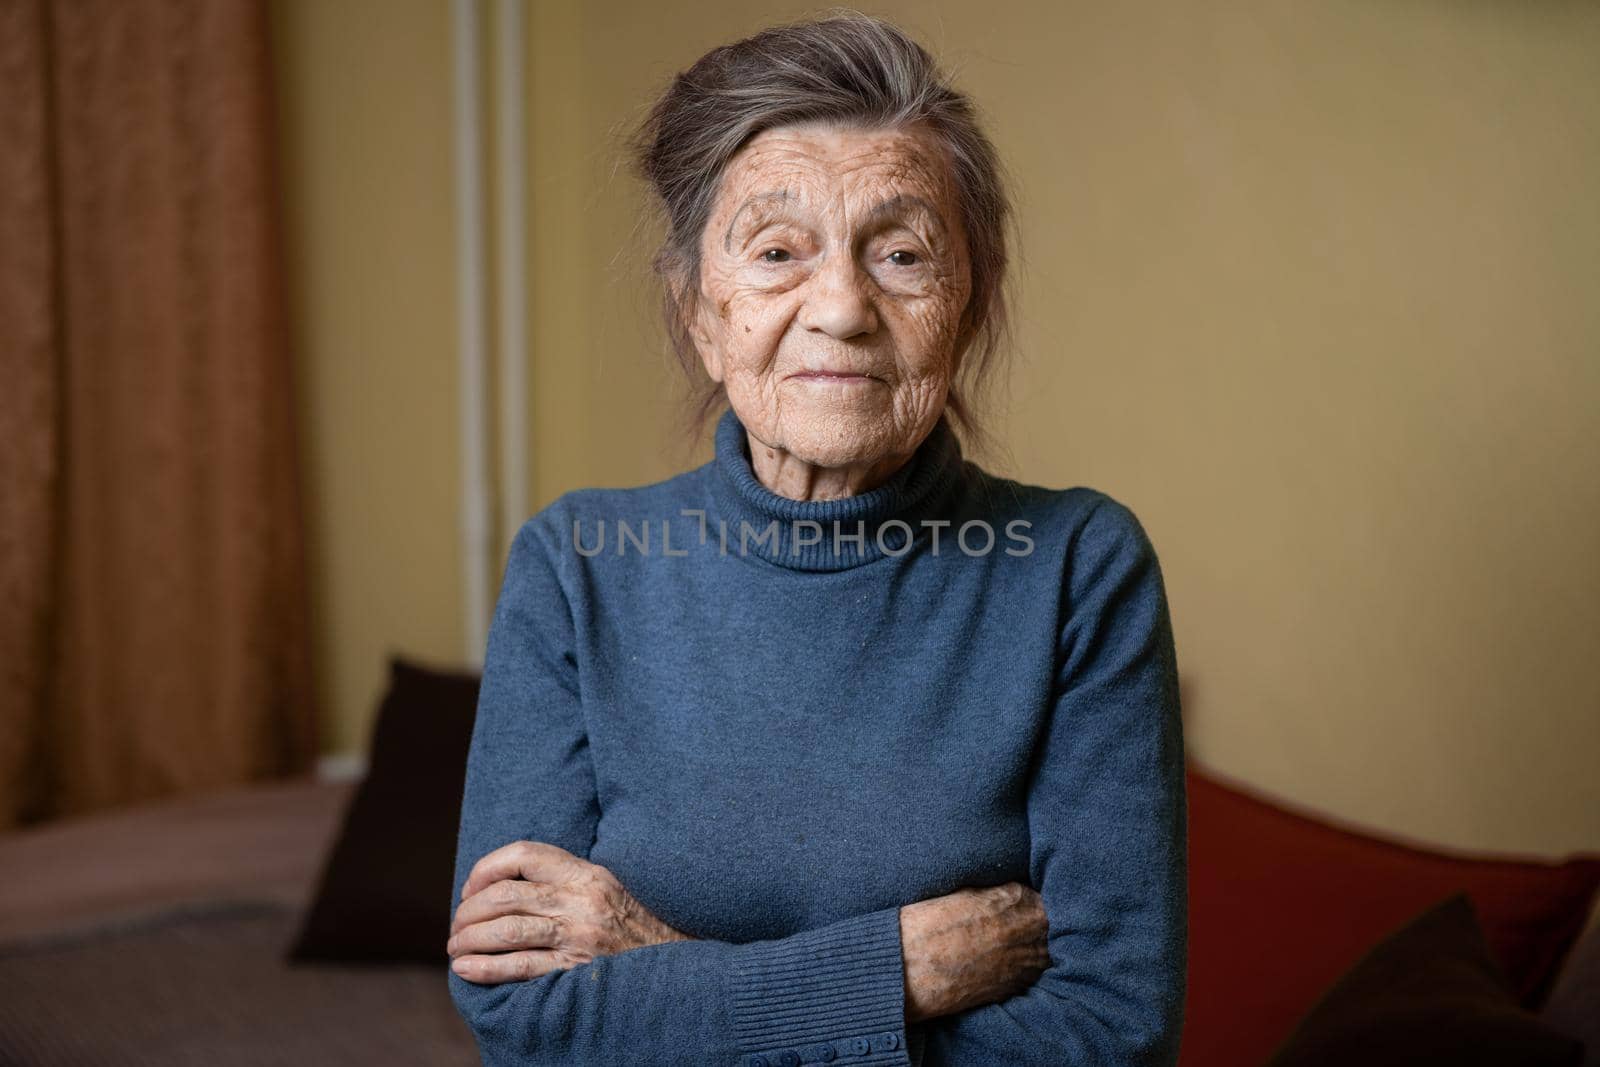 90 year old cute elderly woman with gray hair and wrinkles face, wearing sweater, portrait large, smiling and looking joyfully, background of room. Theme long-liver and aging, old people in good mood.